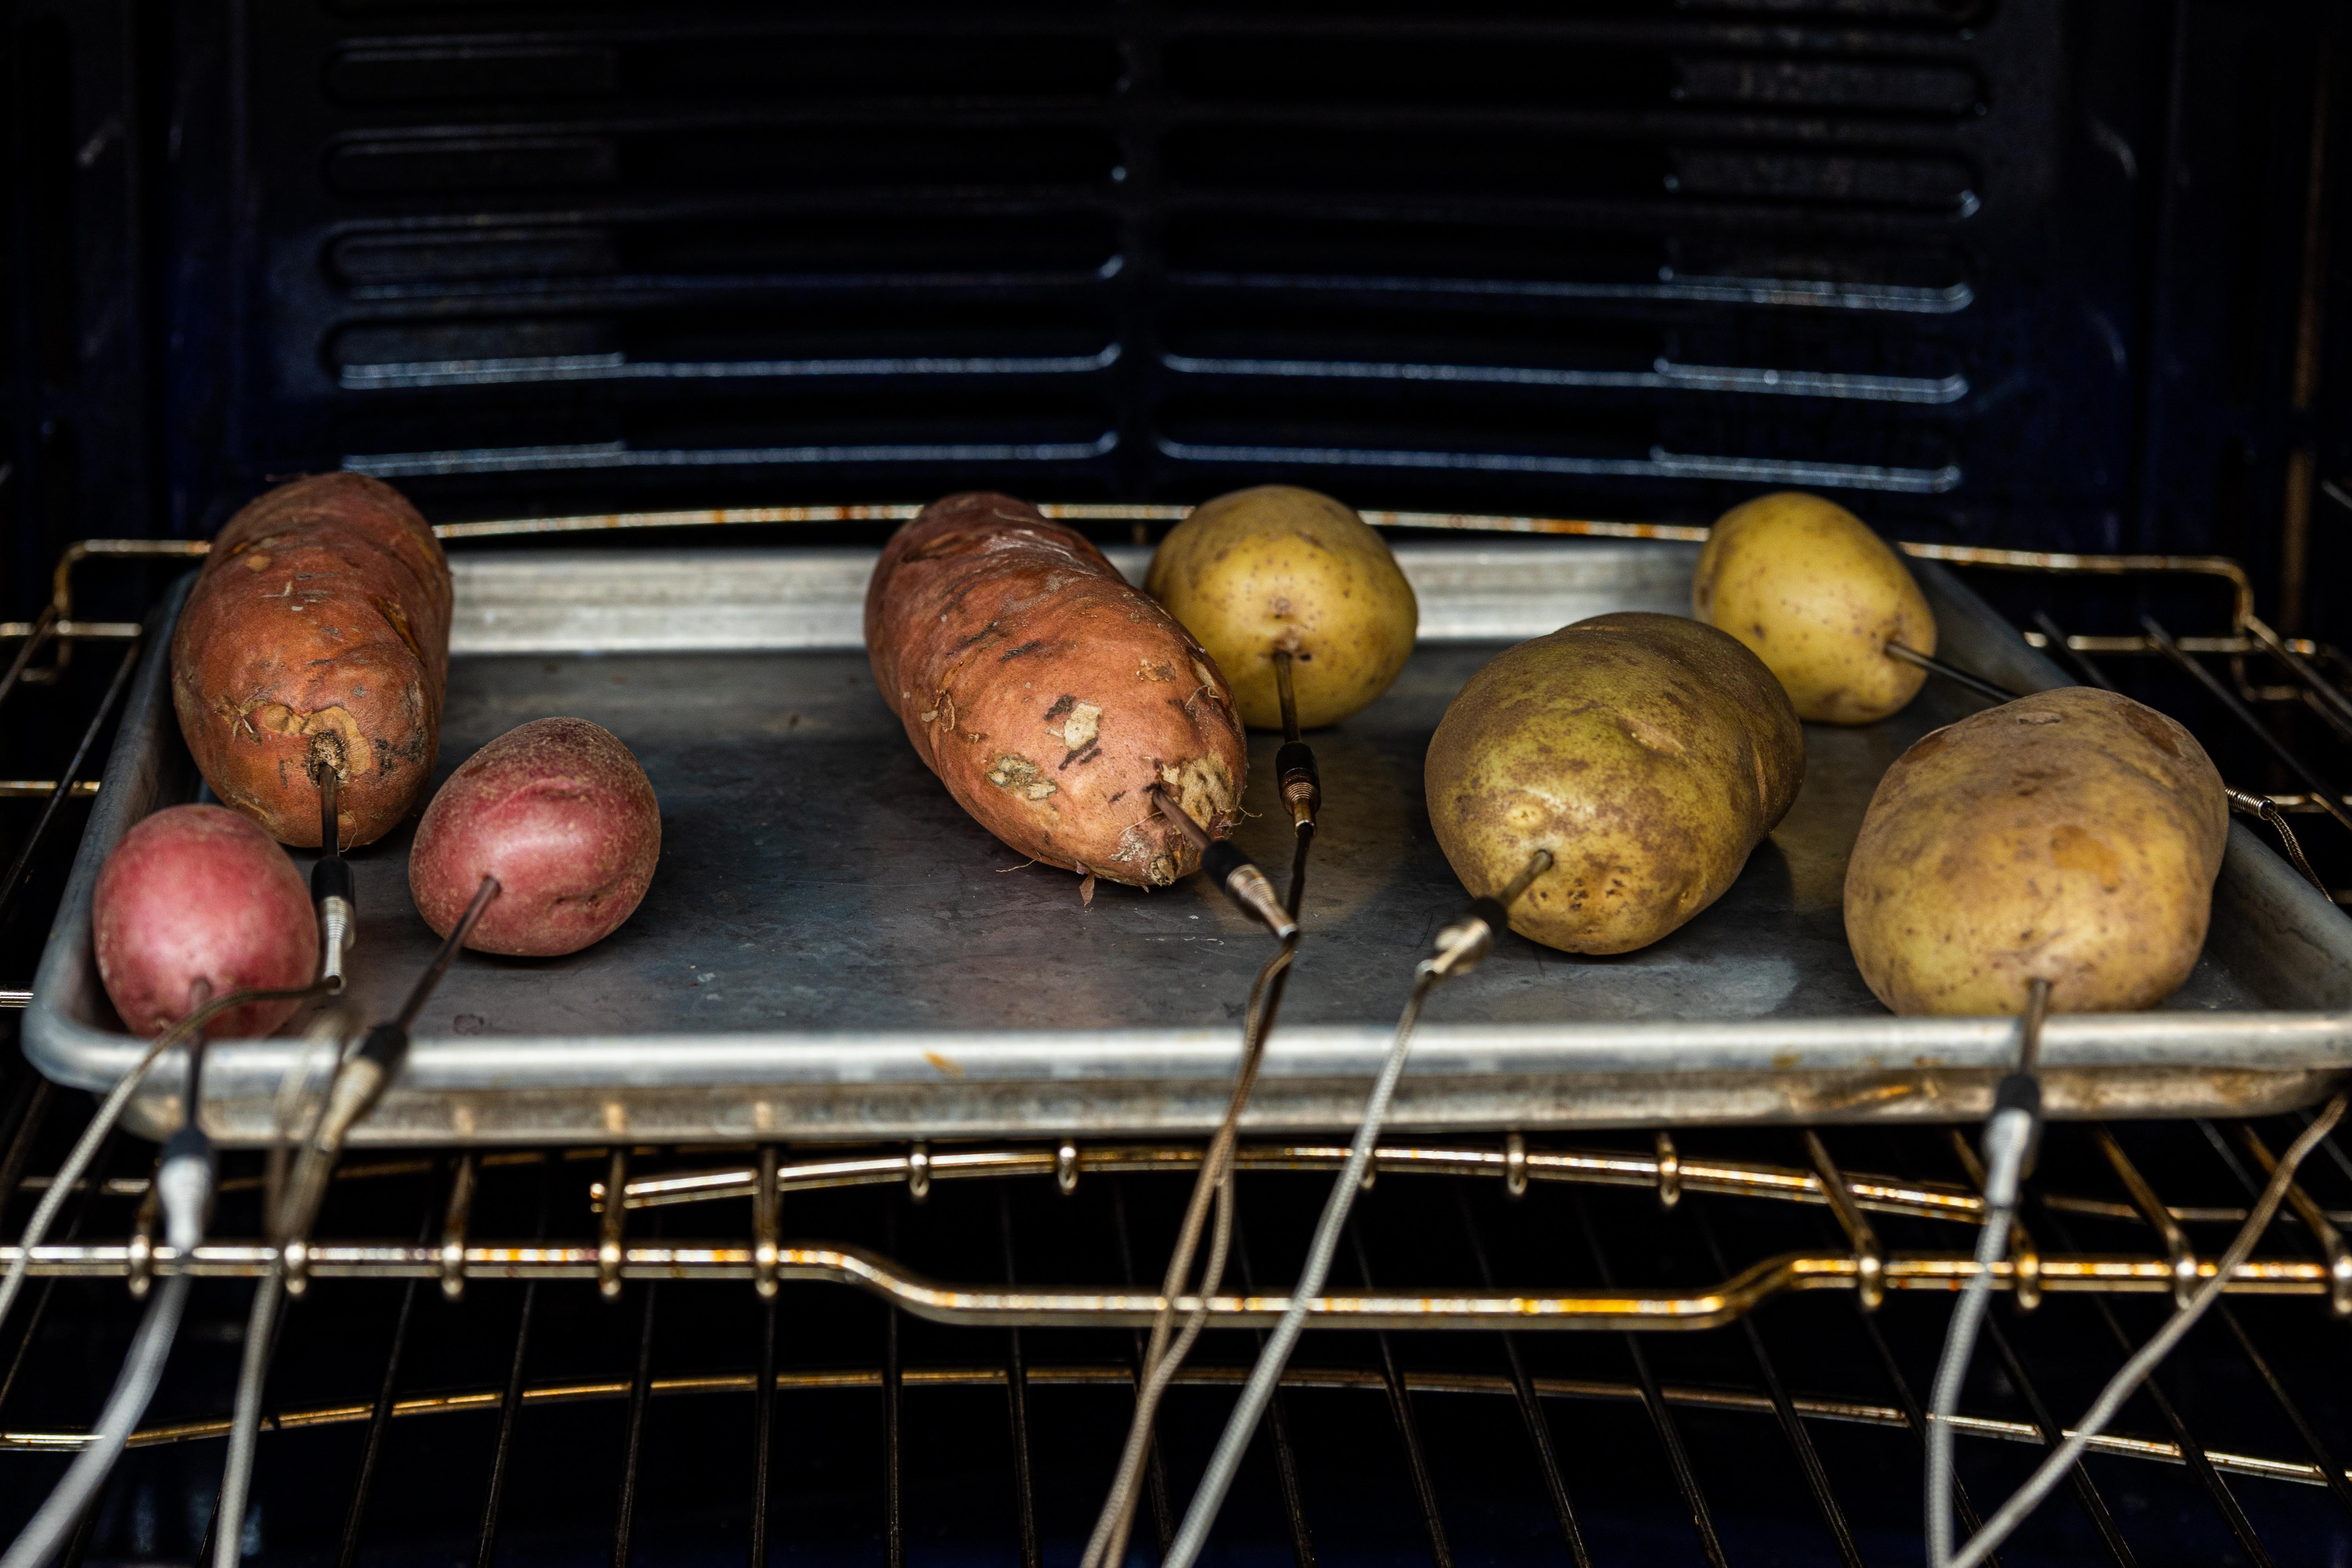 Probed potatoes baking in the oven